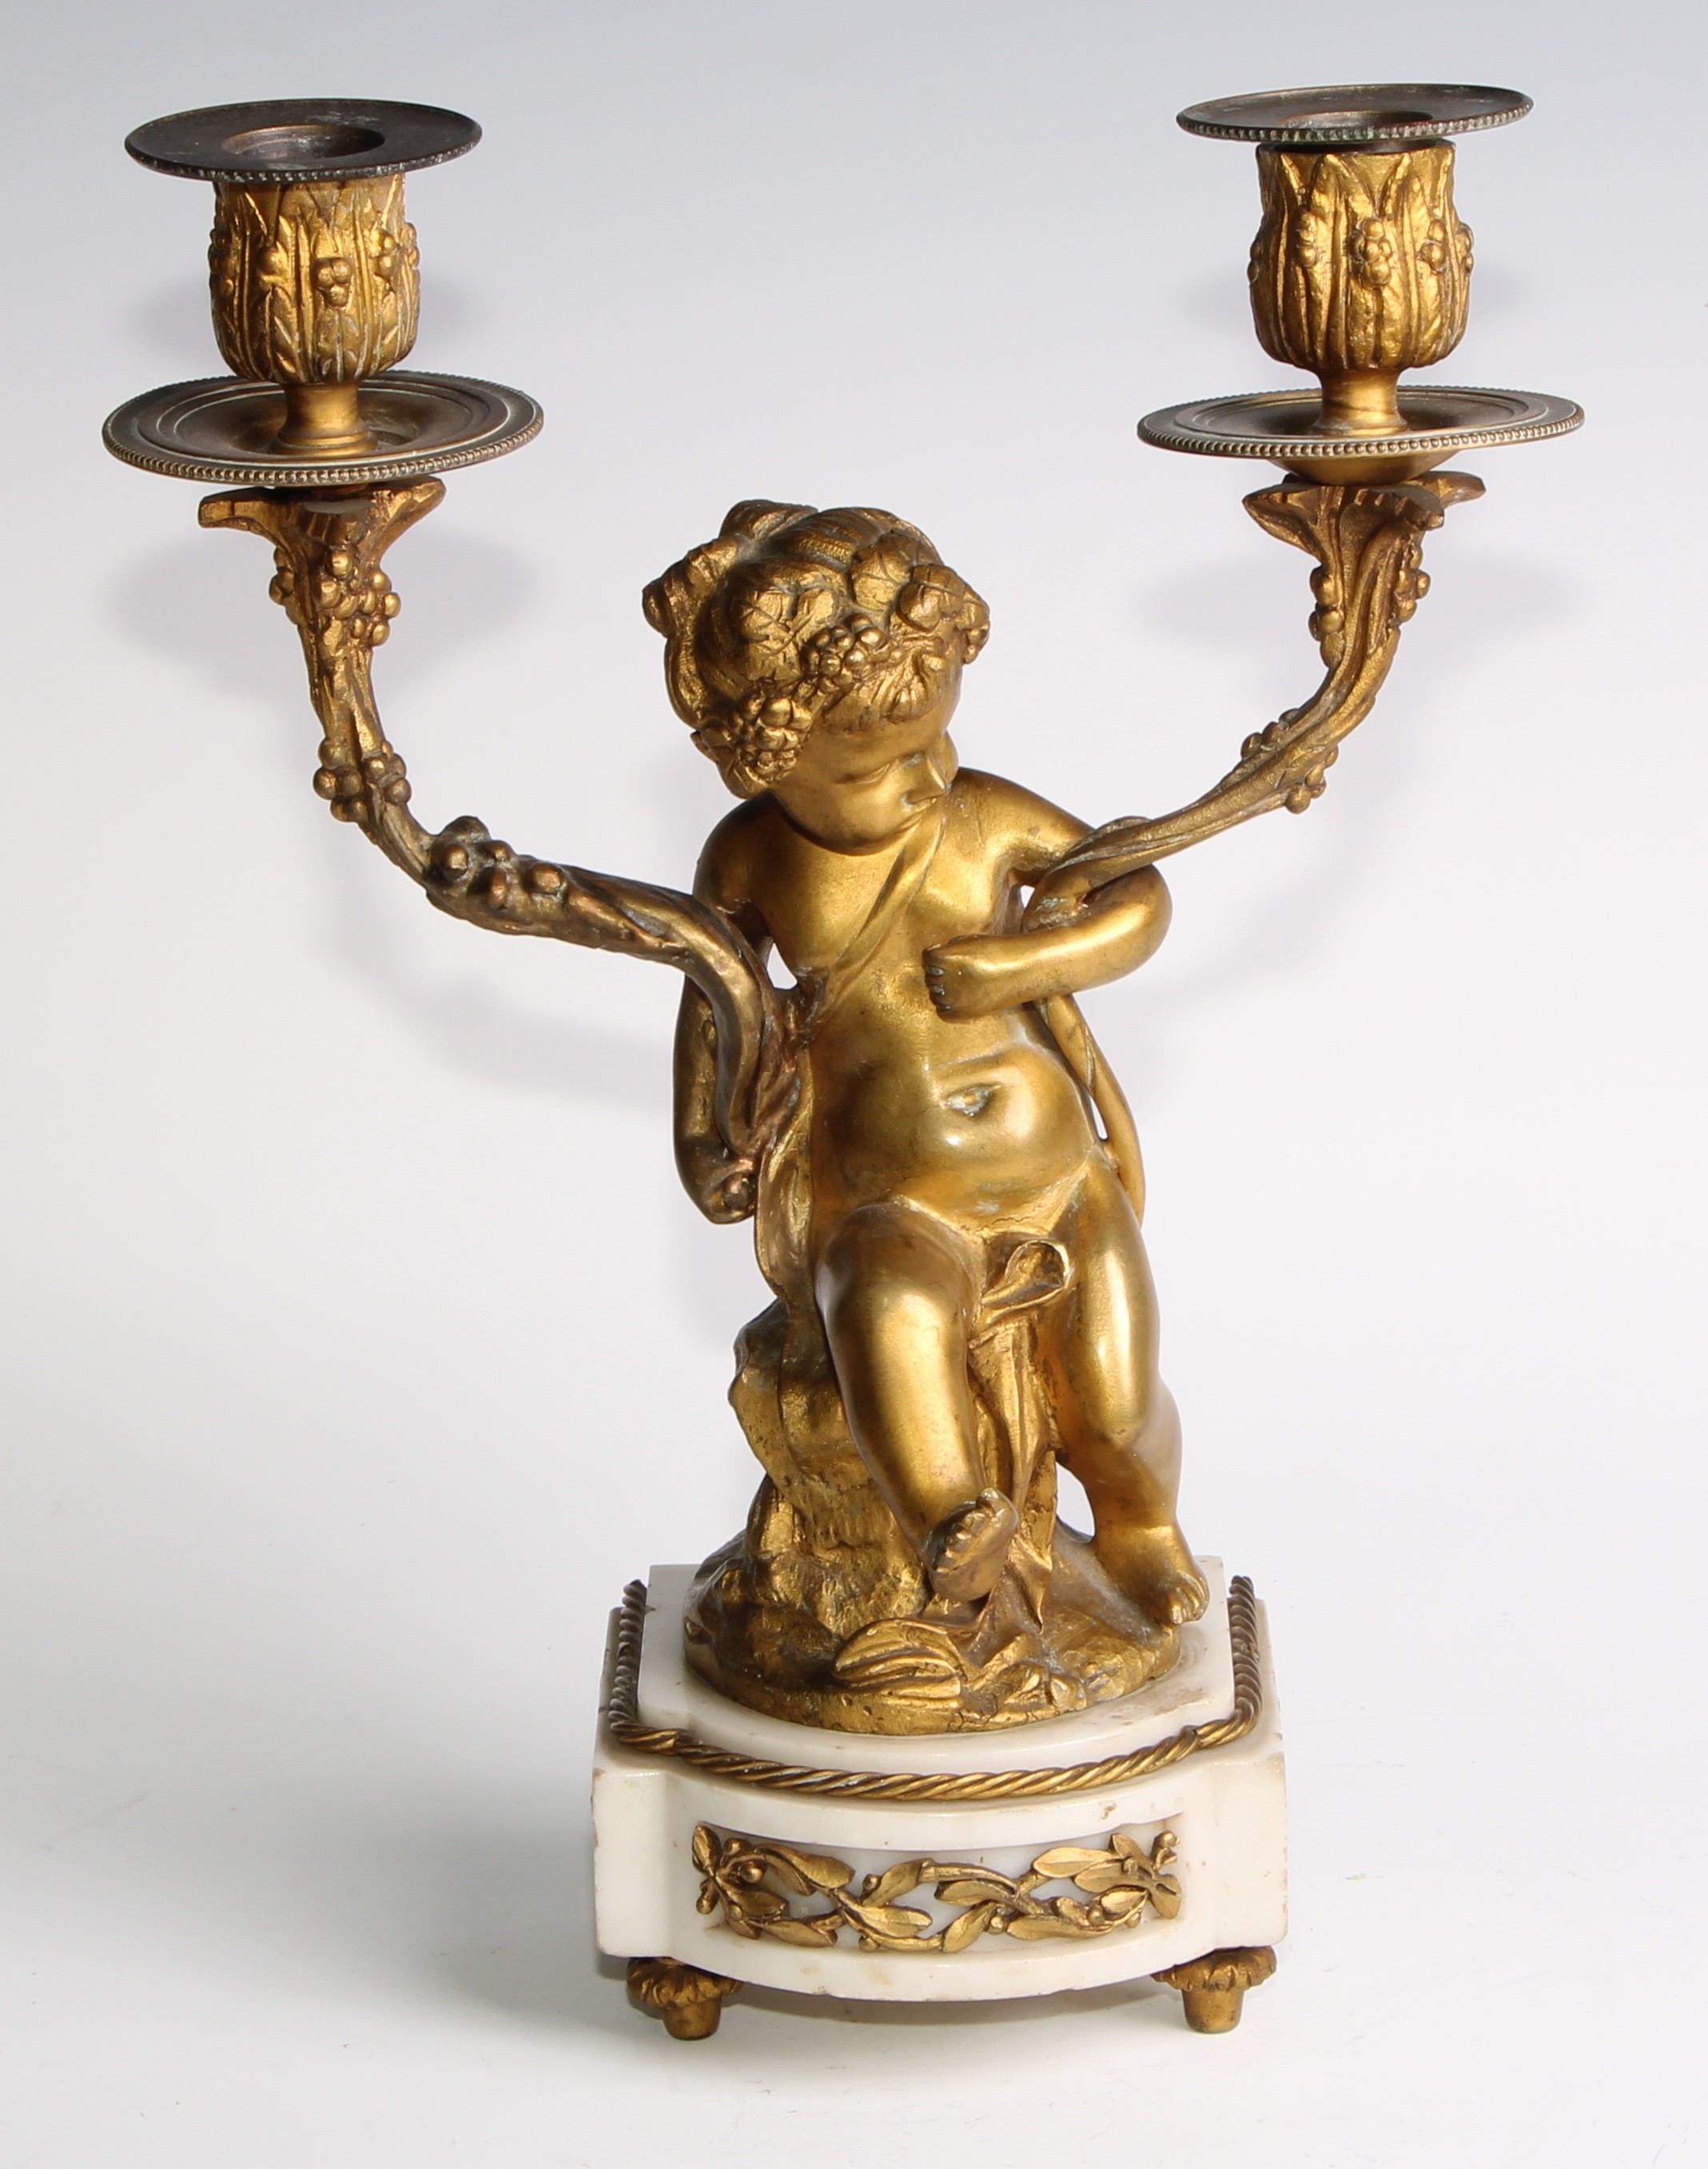 A pair of 19th century French bronze figural two-light candelabra, after Clodion (1738 - 1814), - Image 3 of 12